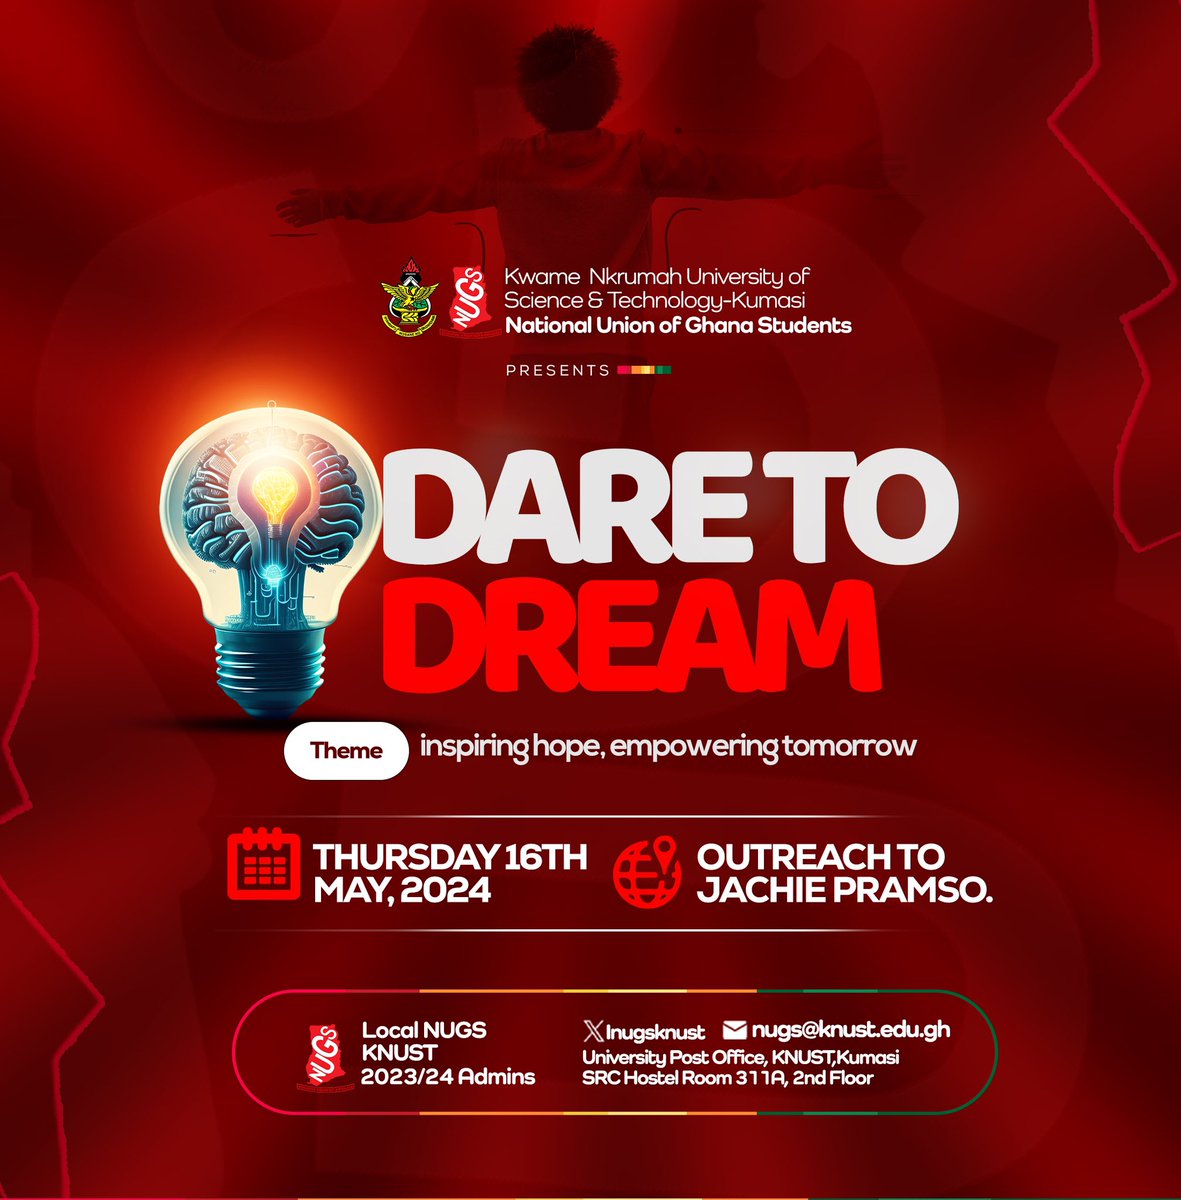 The Dare to Dream outreach, tomorrow 16th May 2024 at Jachie Pramso.

The theme of this outreach is “Inspiring hope, empowering tomorrow”.
This outreach is spearheaded by the KNUST LNUGs.

#DareToDream